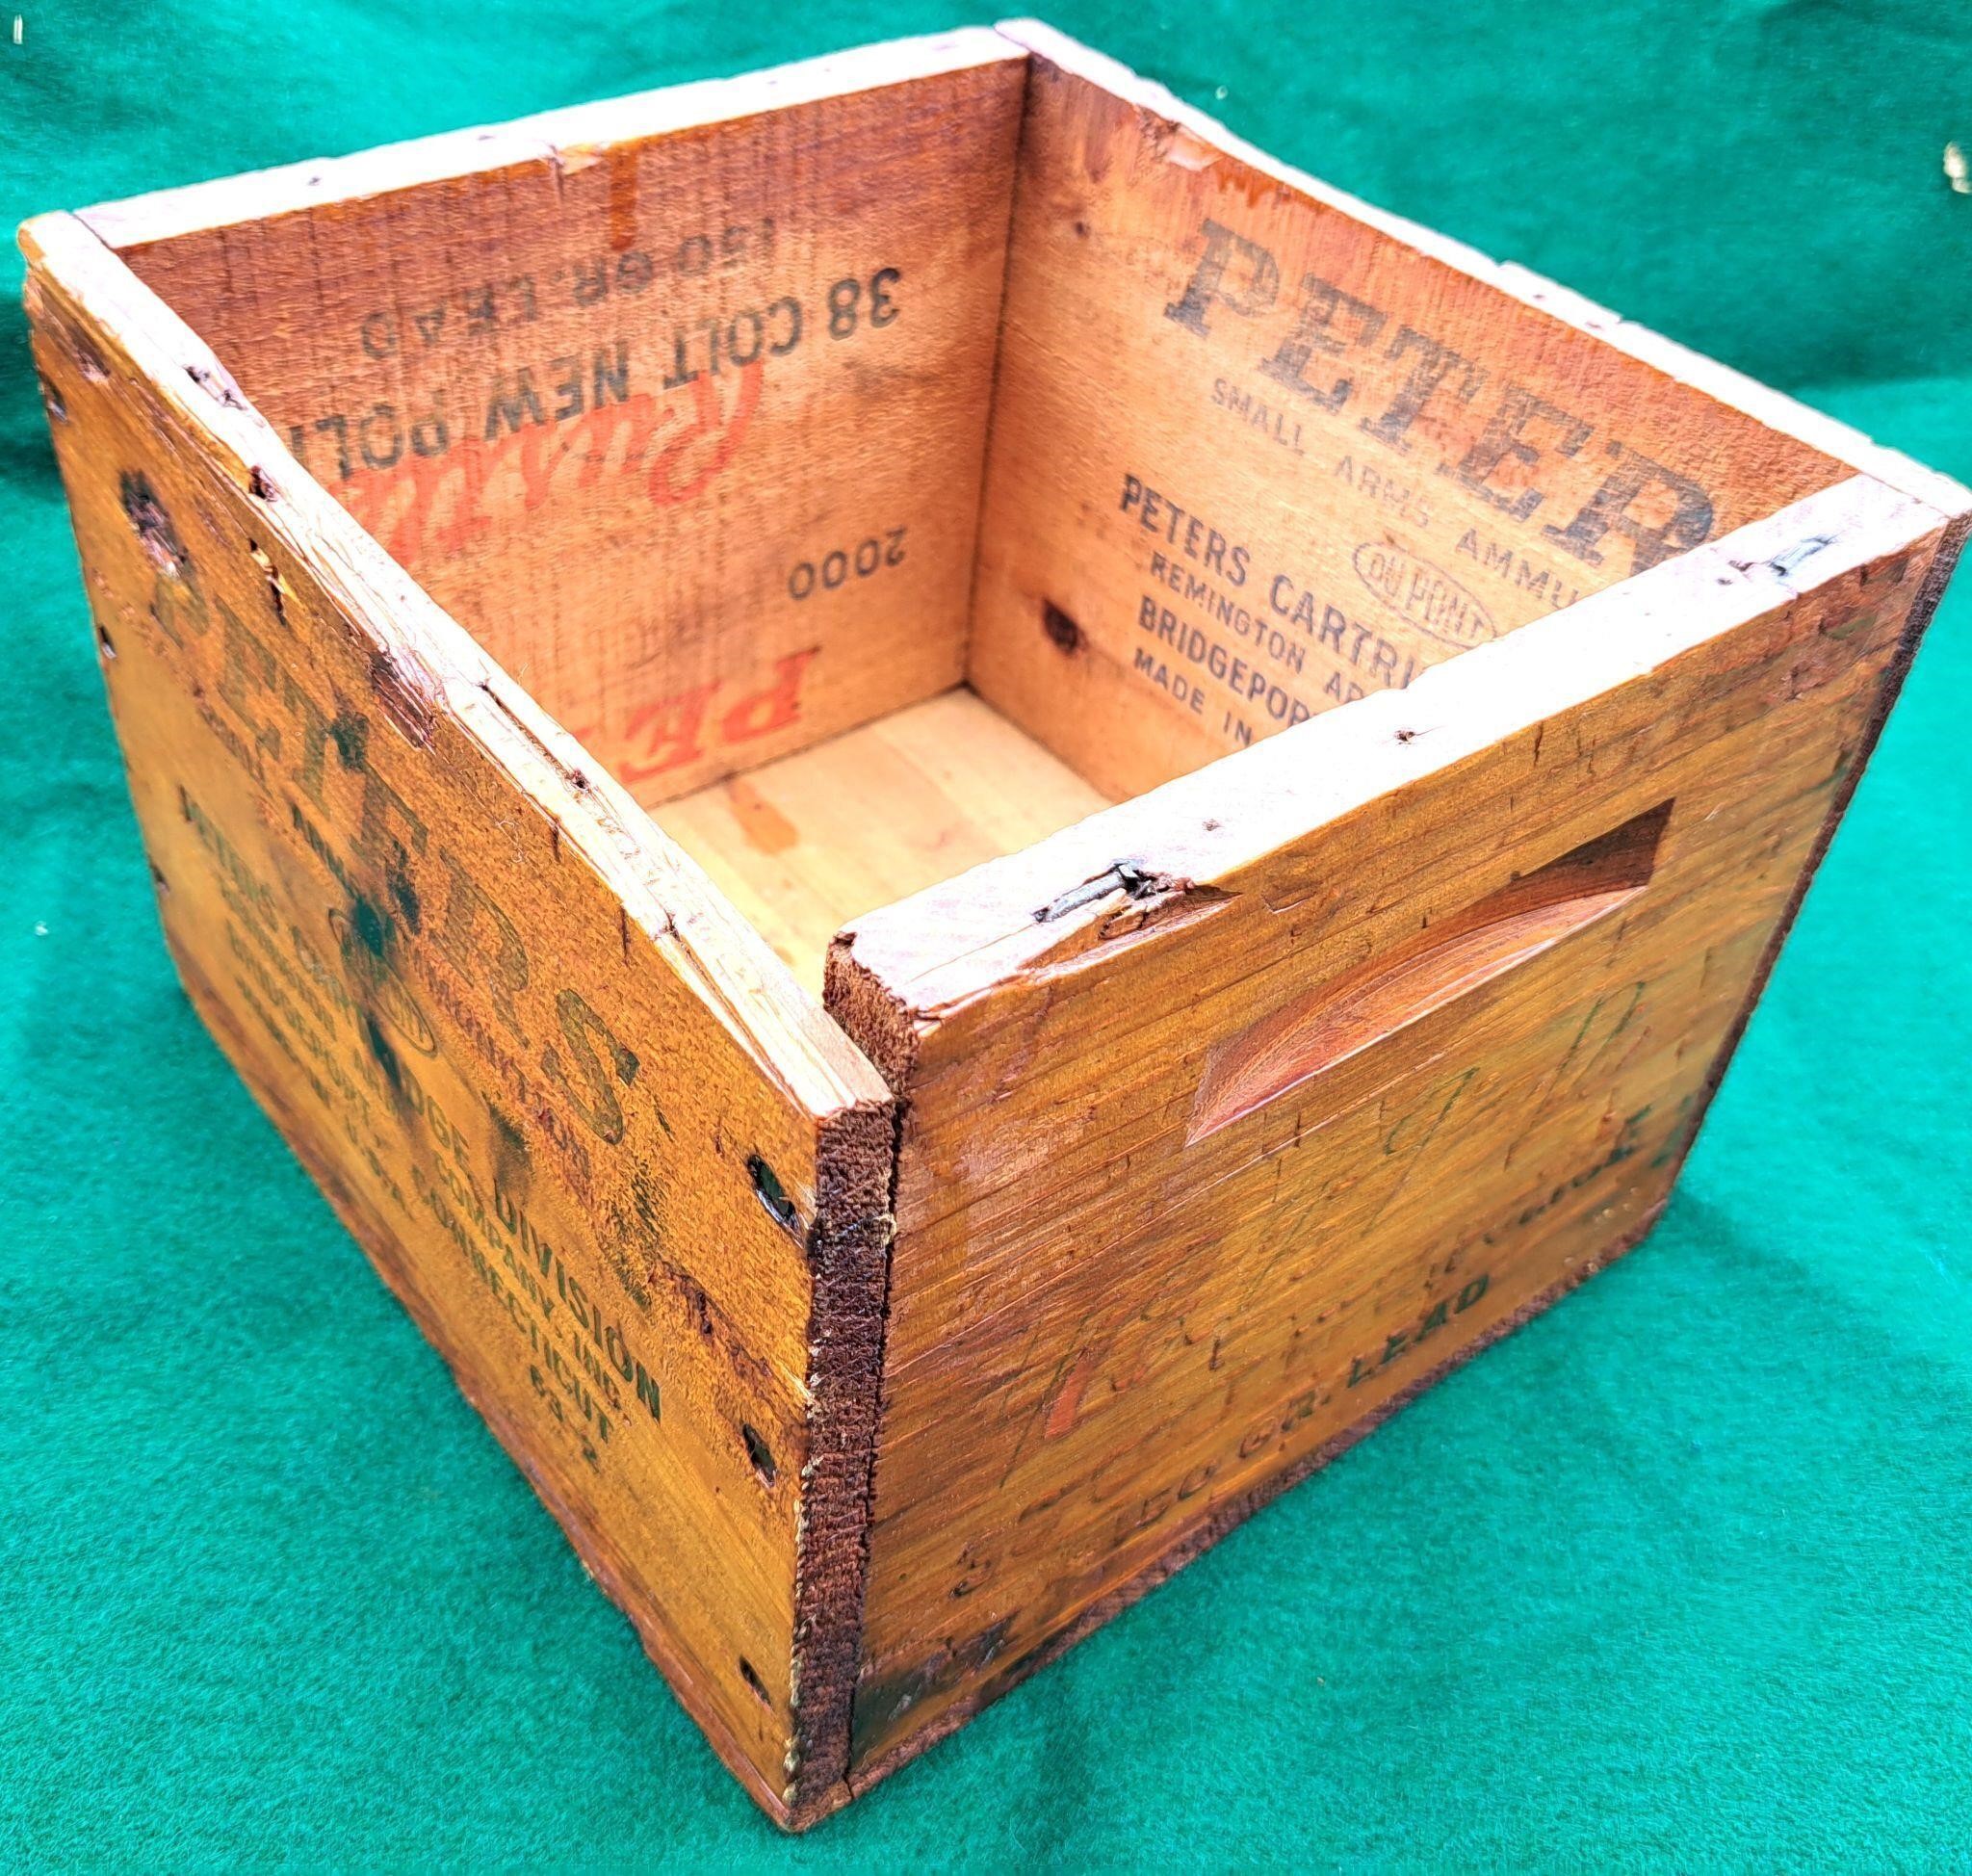 PETERS CARTRIDGE WOOD BOX 38 COLT NEW POLICE AMMO